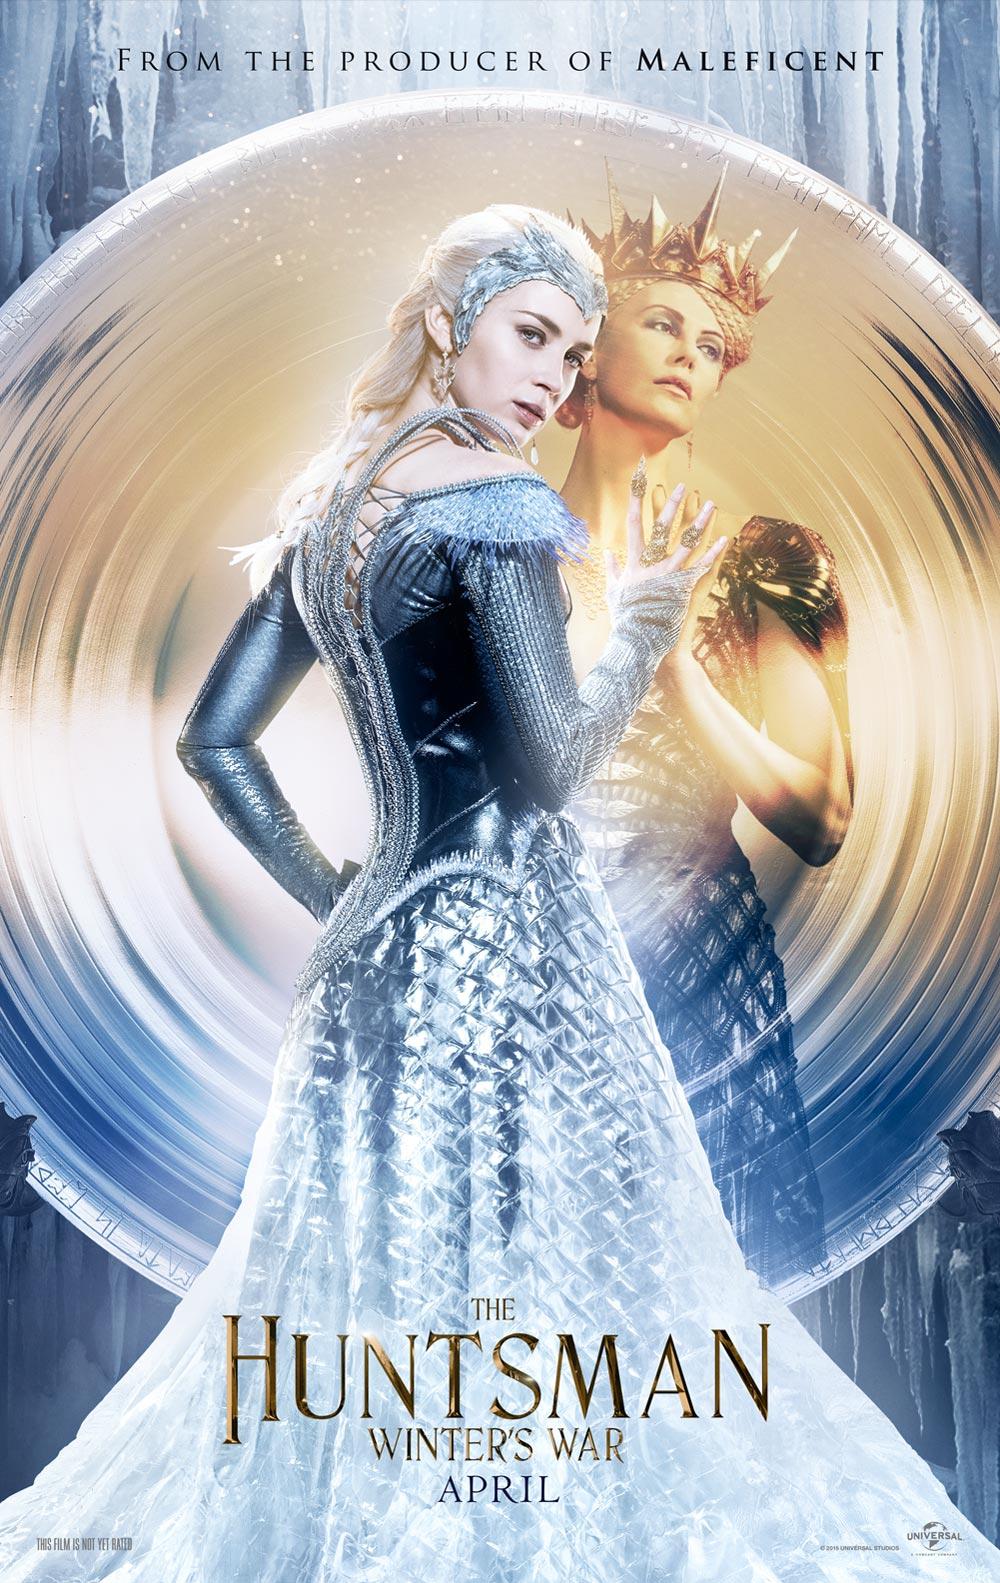 The Huntsman: Winter's War Poster. In Theaters Now